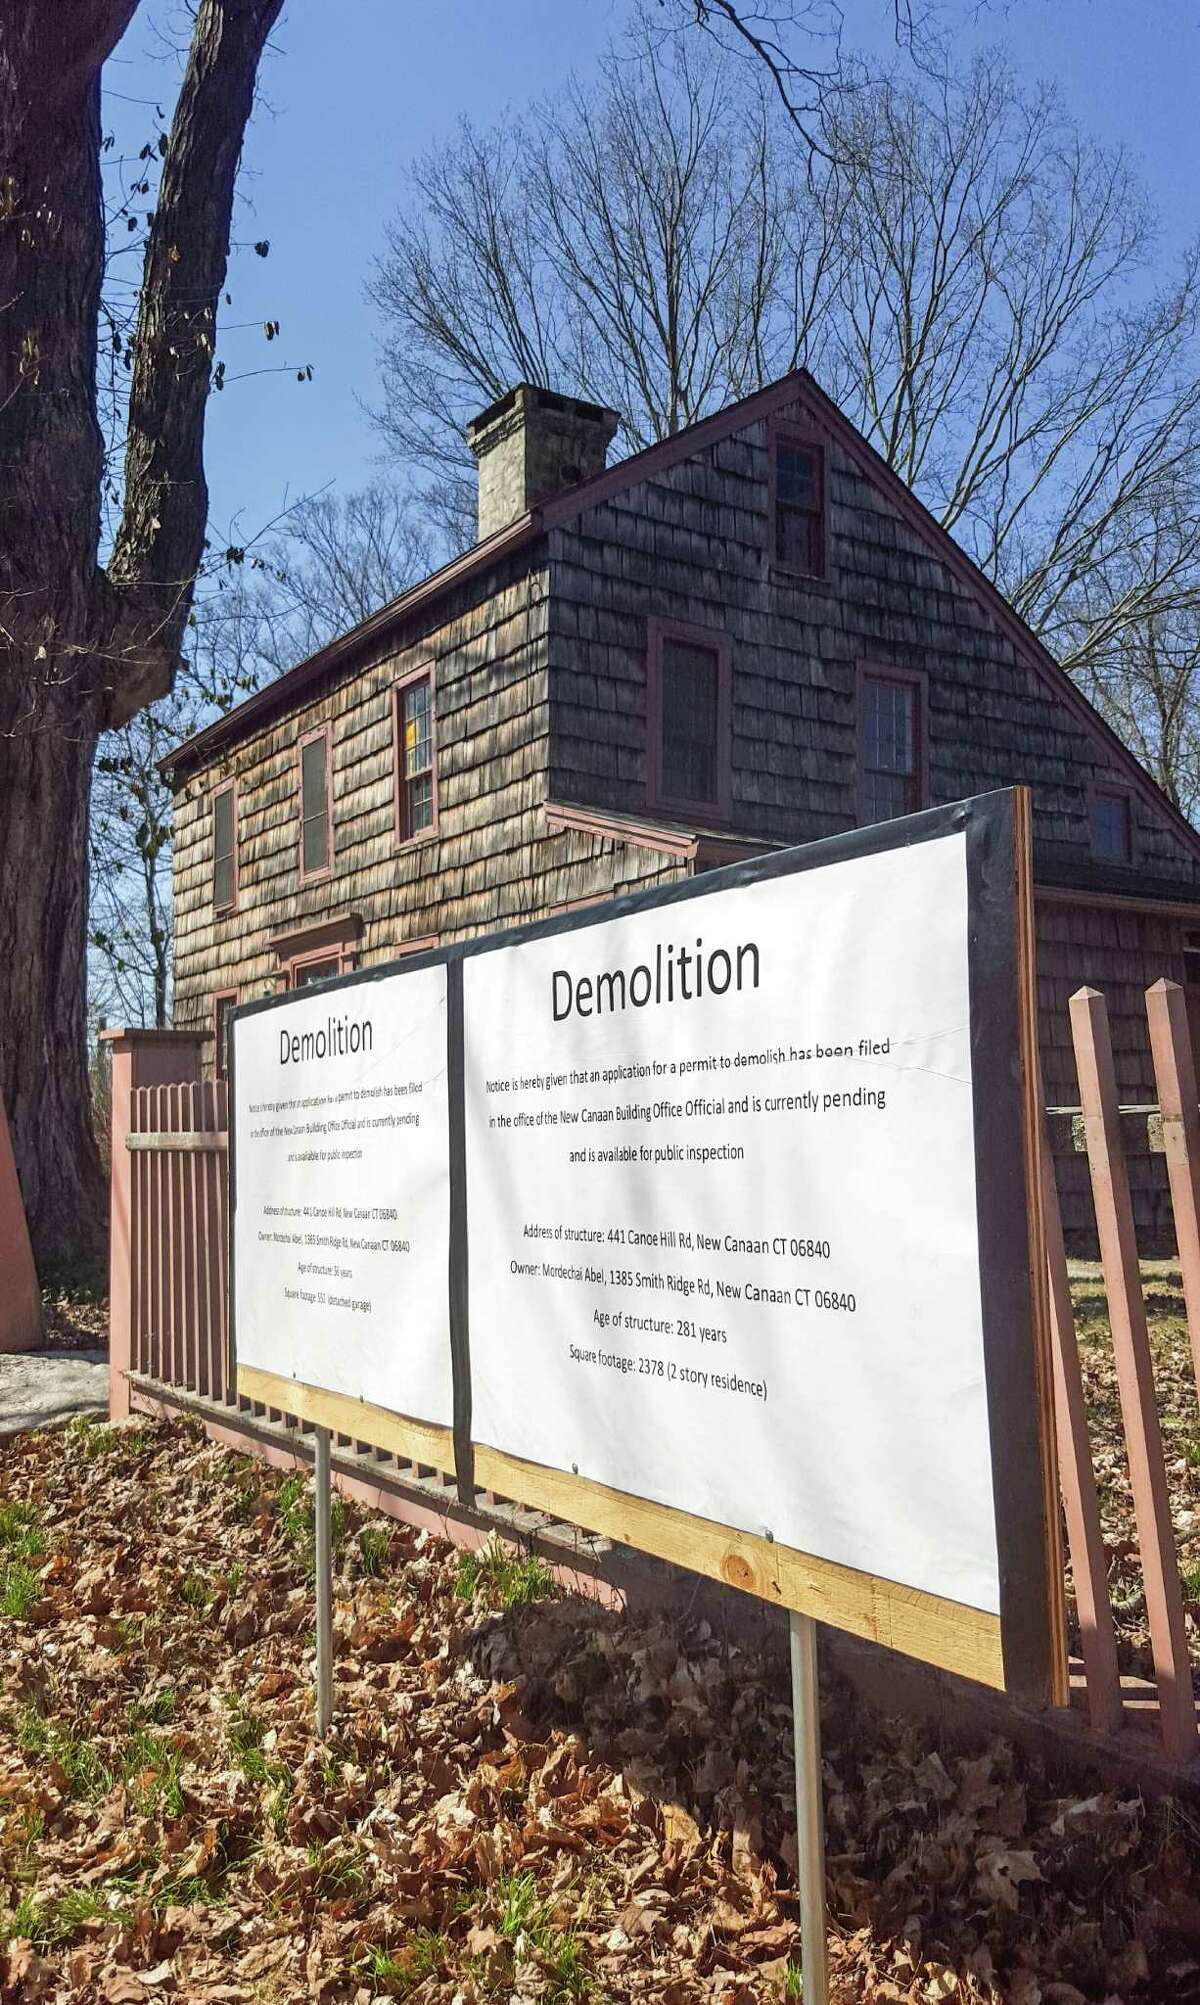 This historic house at 8 Ferris Hill in New Canaan has been saved from demolition, at least for 90 days.